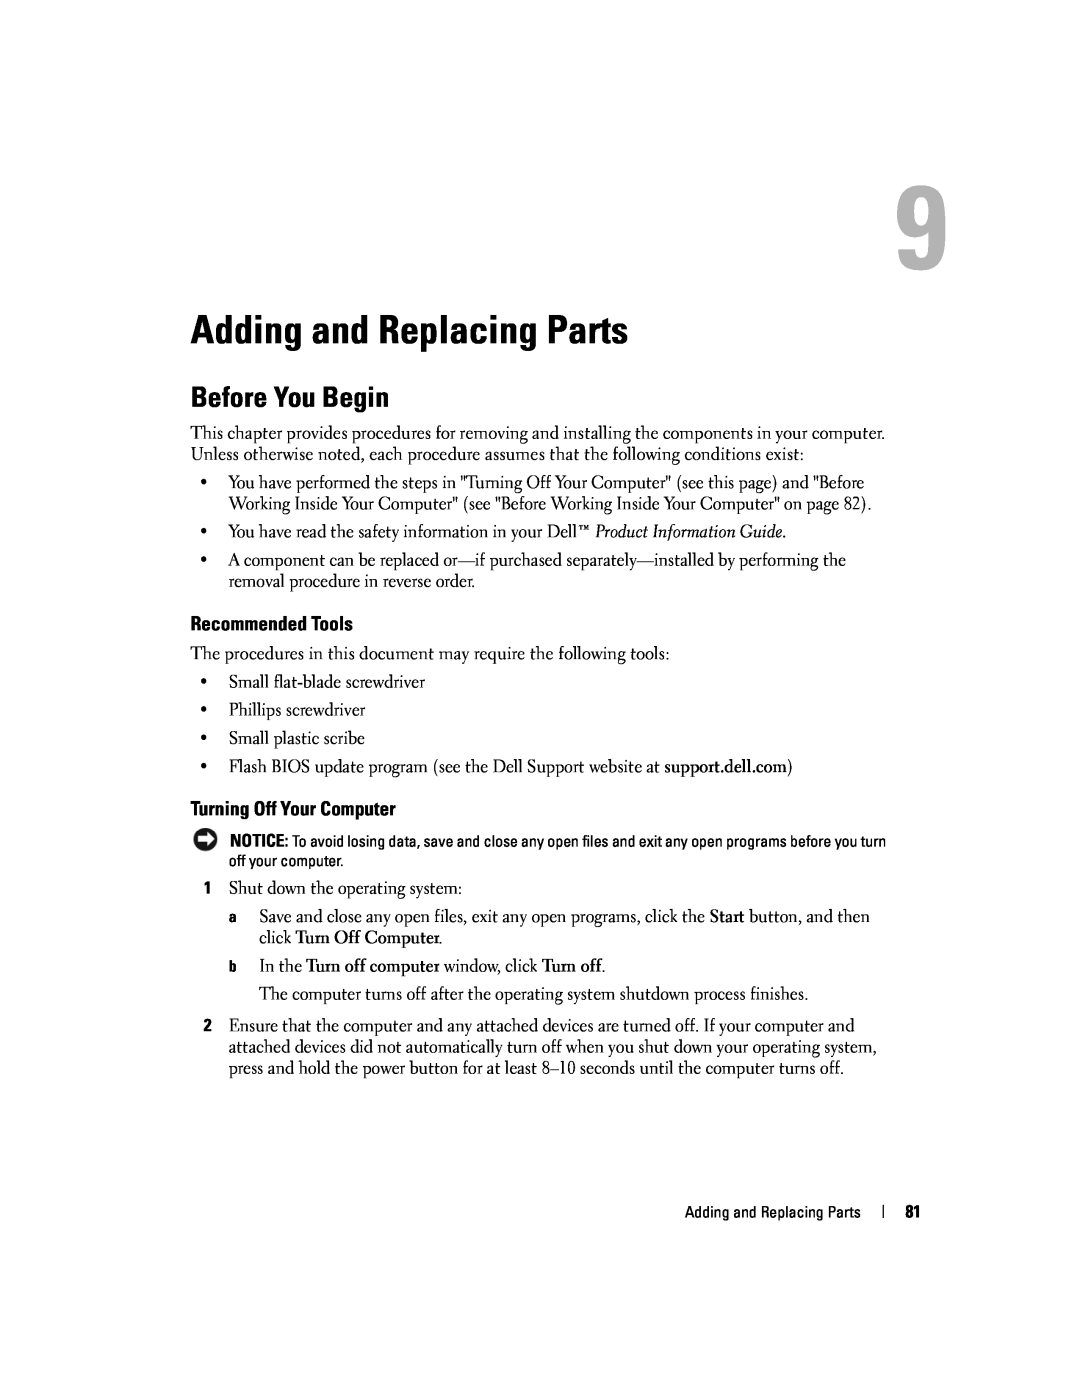 Dell 9300 owner manual Adding and Replacing Parts, Before You Begin, Recommended Tools, Turning Off Your Computer 